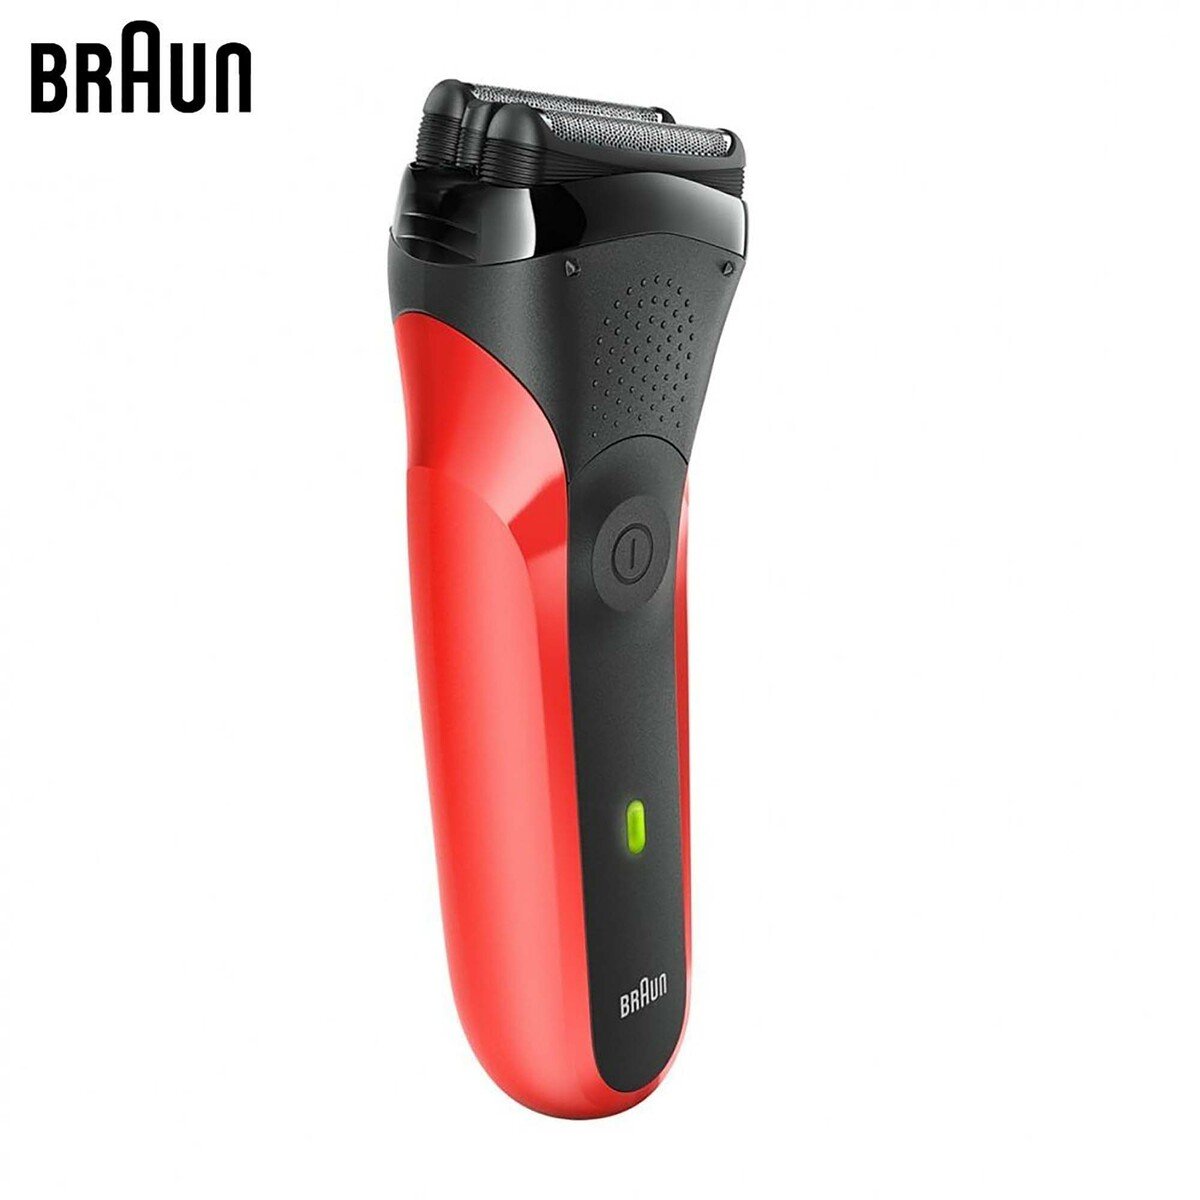 Braun Rechargeable Mens Shaver 300TS